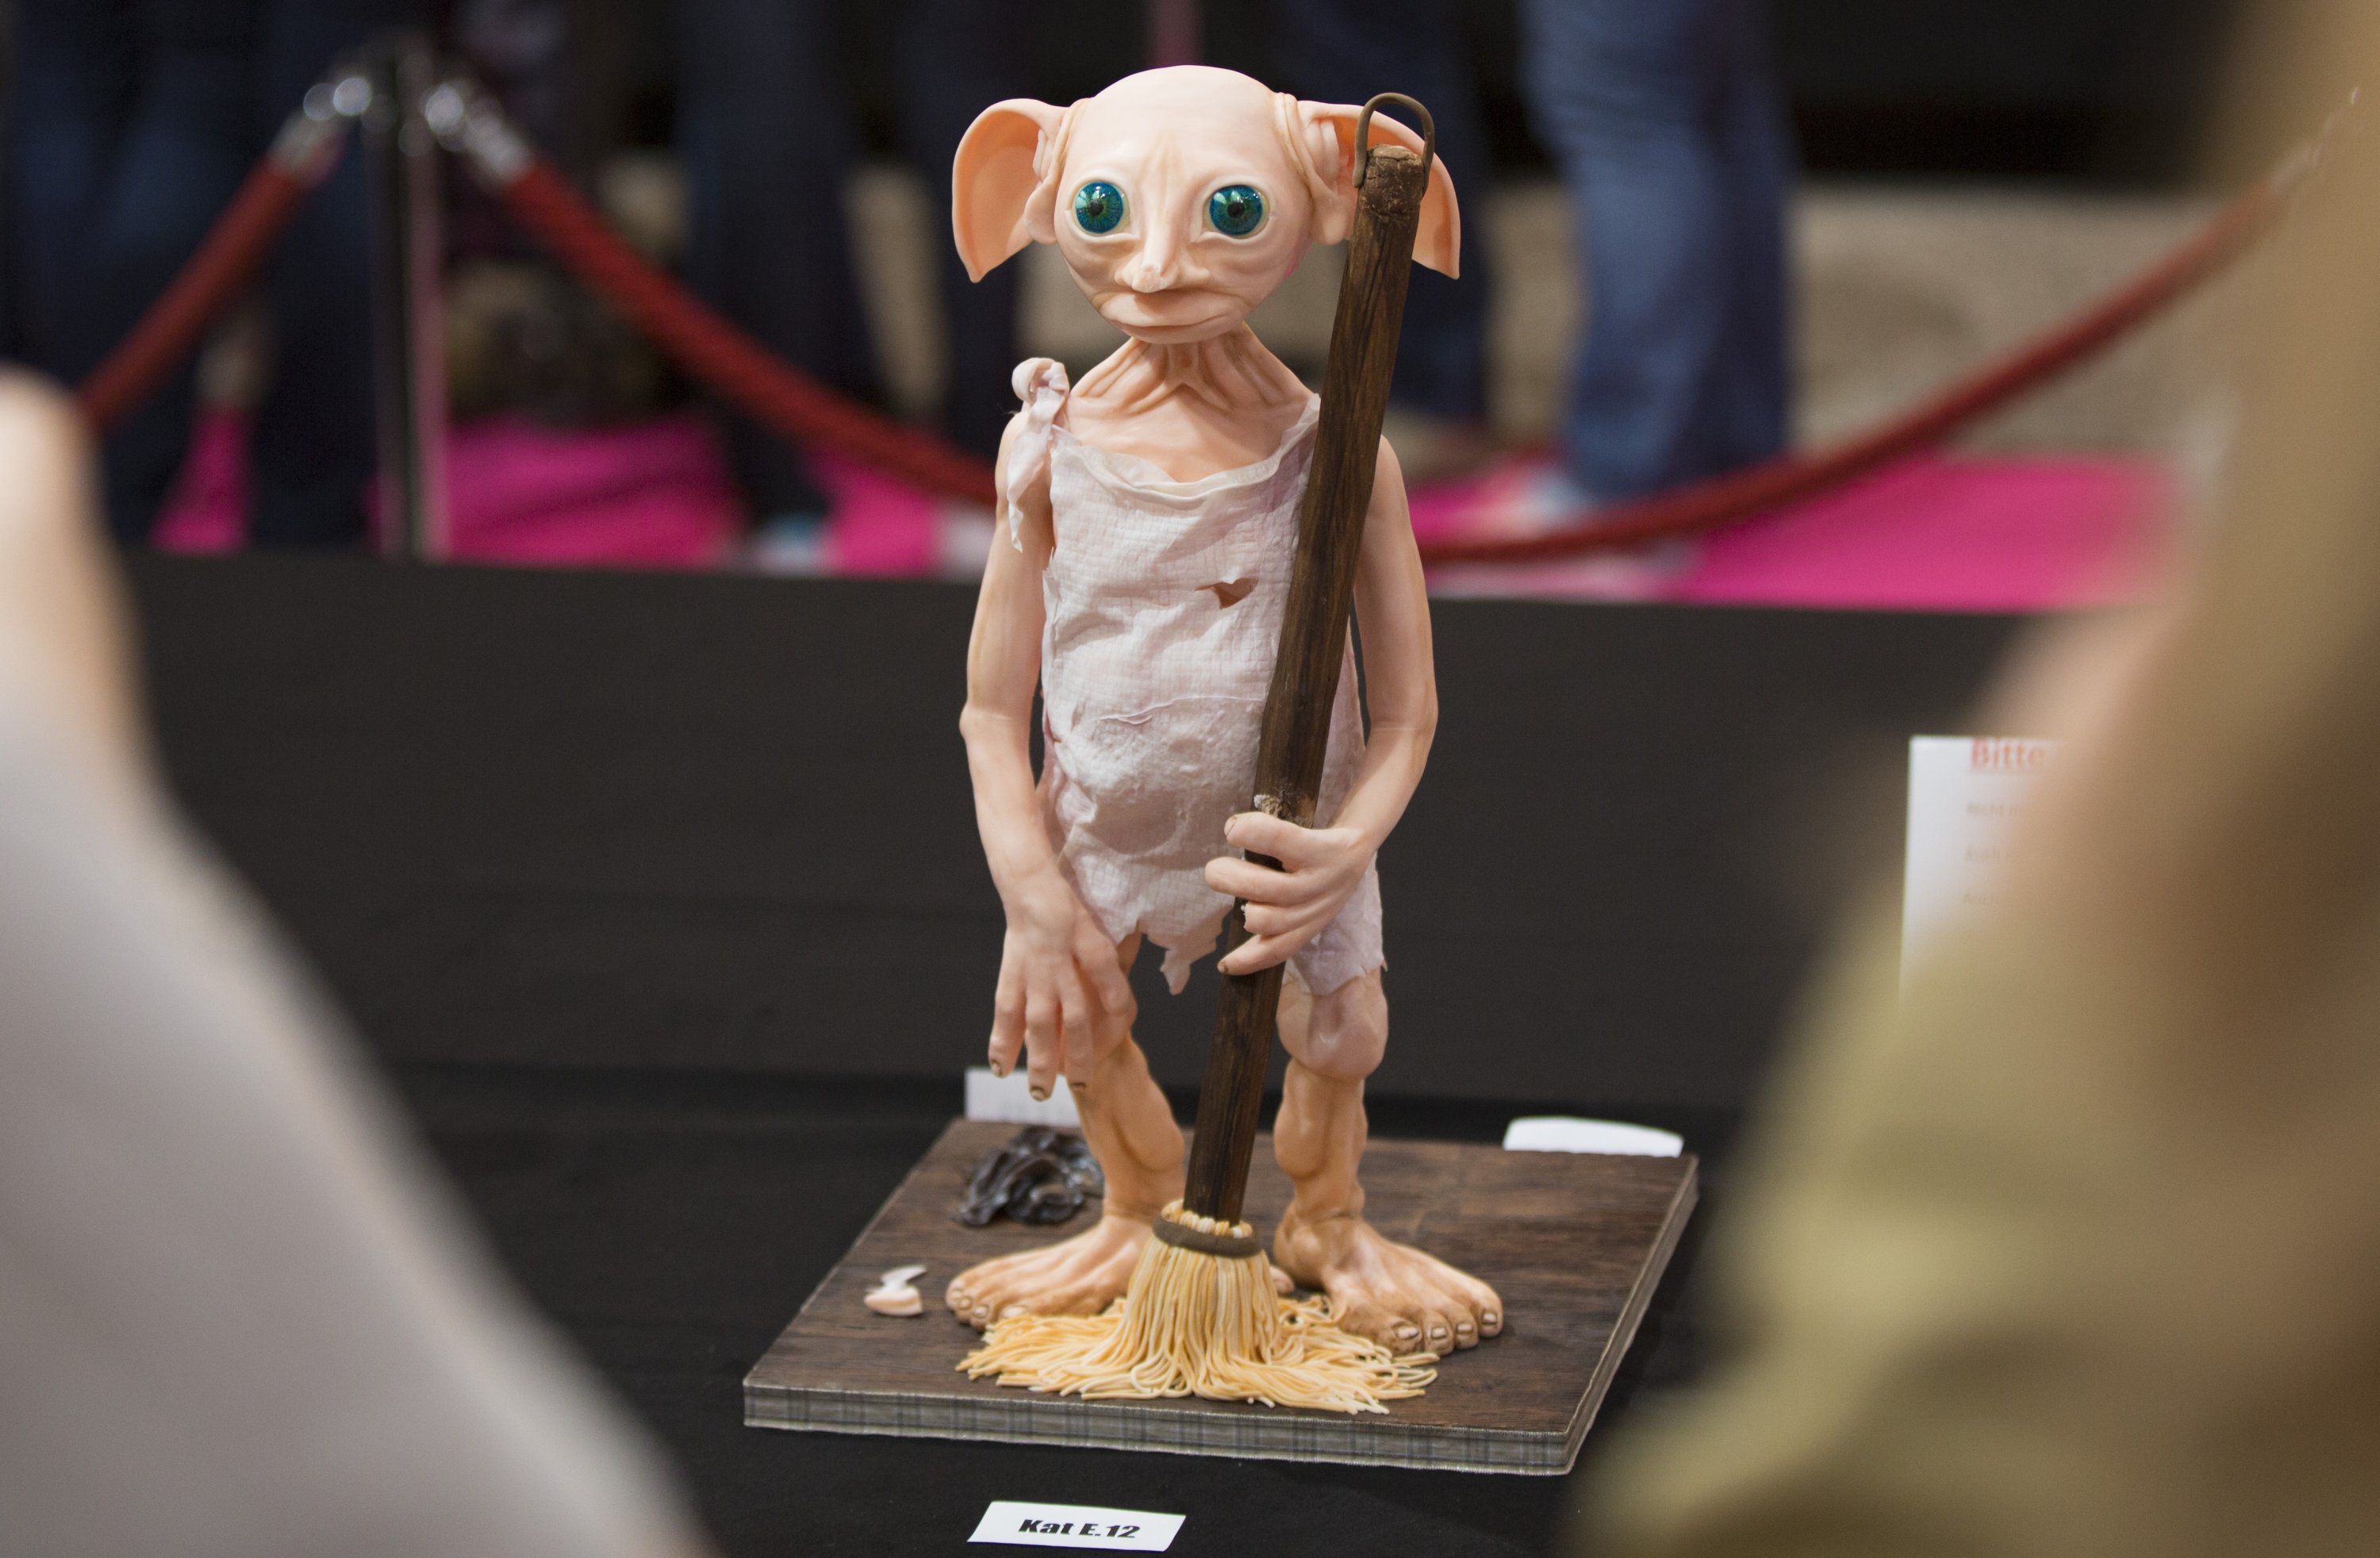 Such a beautiful place': Harry Potter's Dobby grave sparks sock